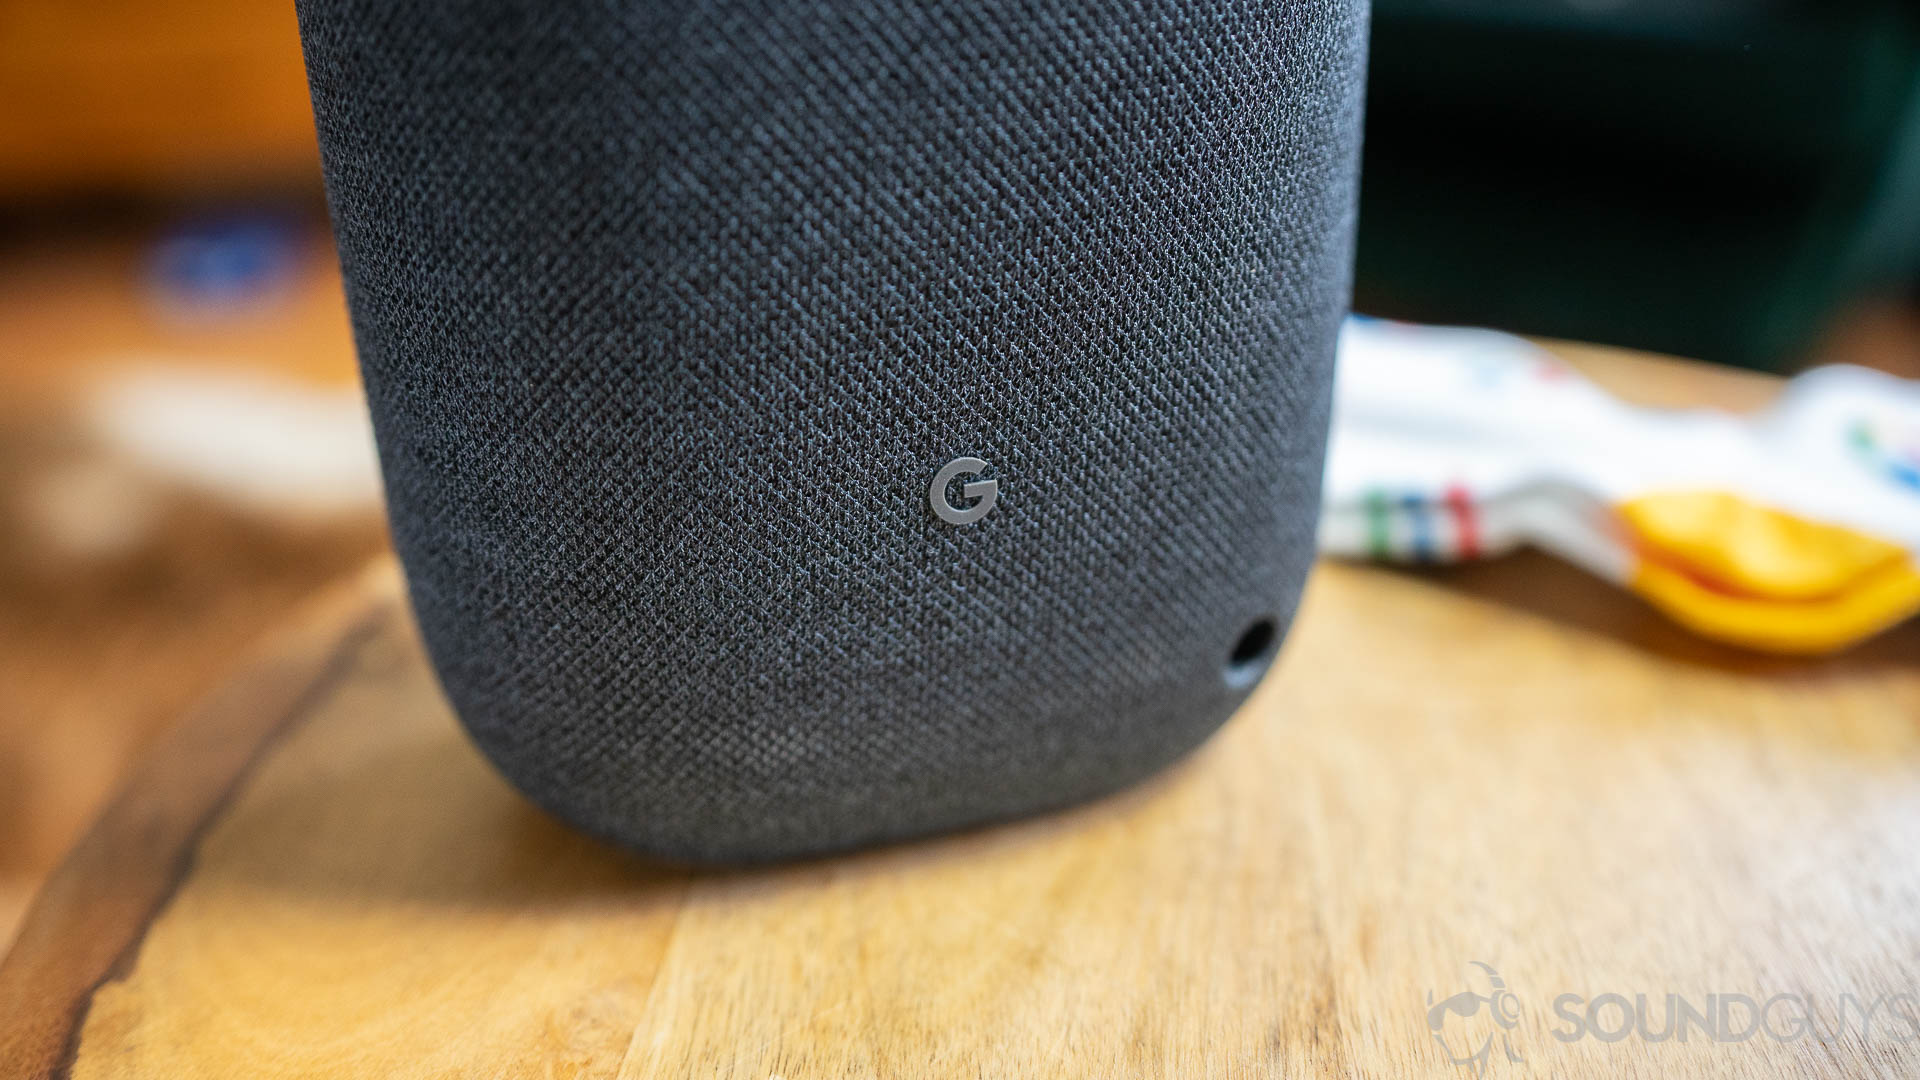 Pictured is the "G" logo on the back on the Google Nest Audio on a wooden surface